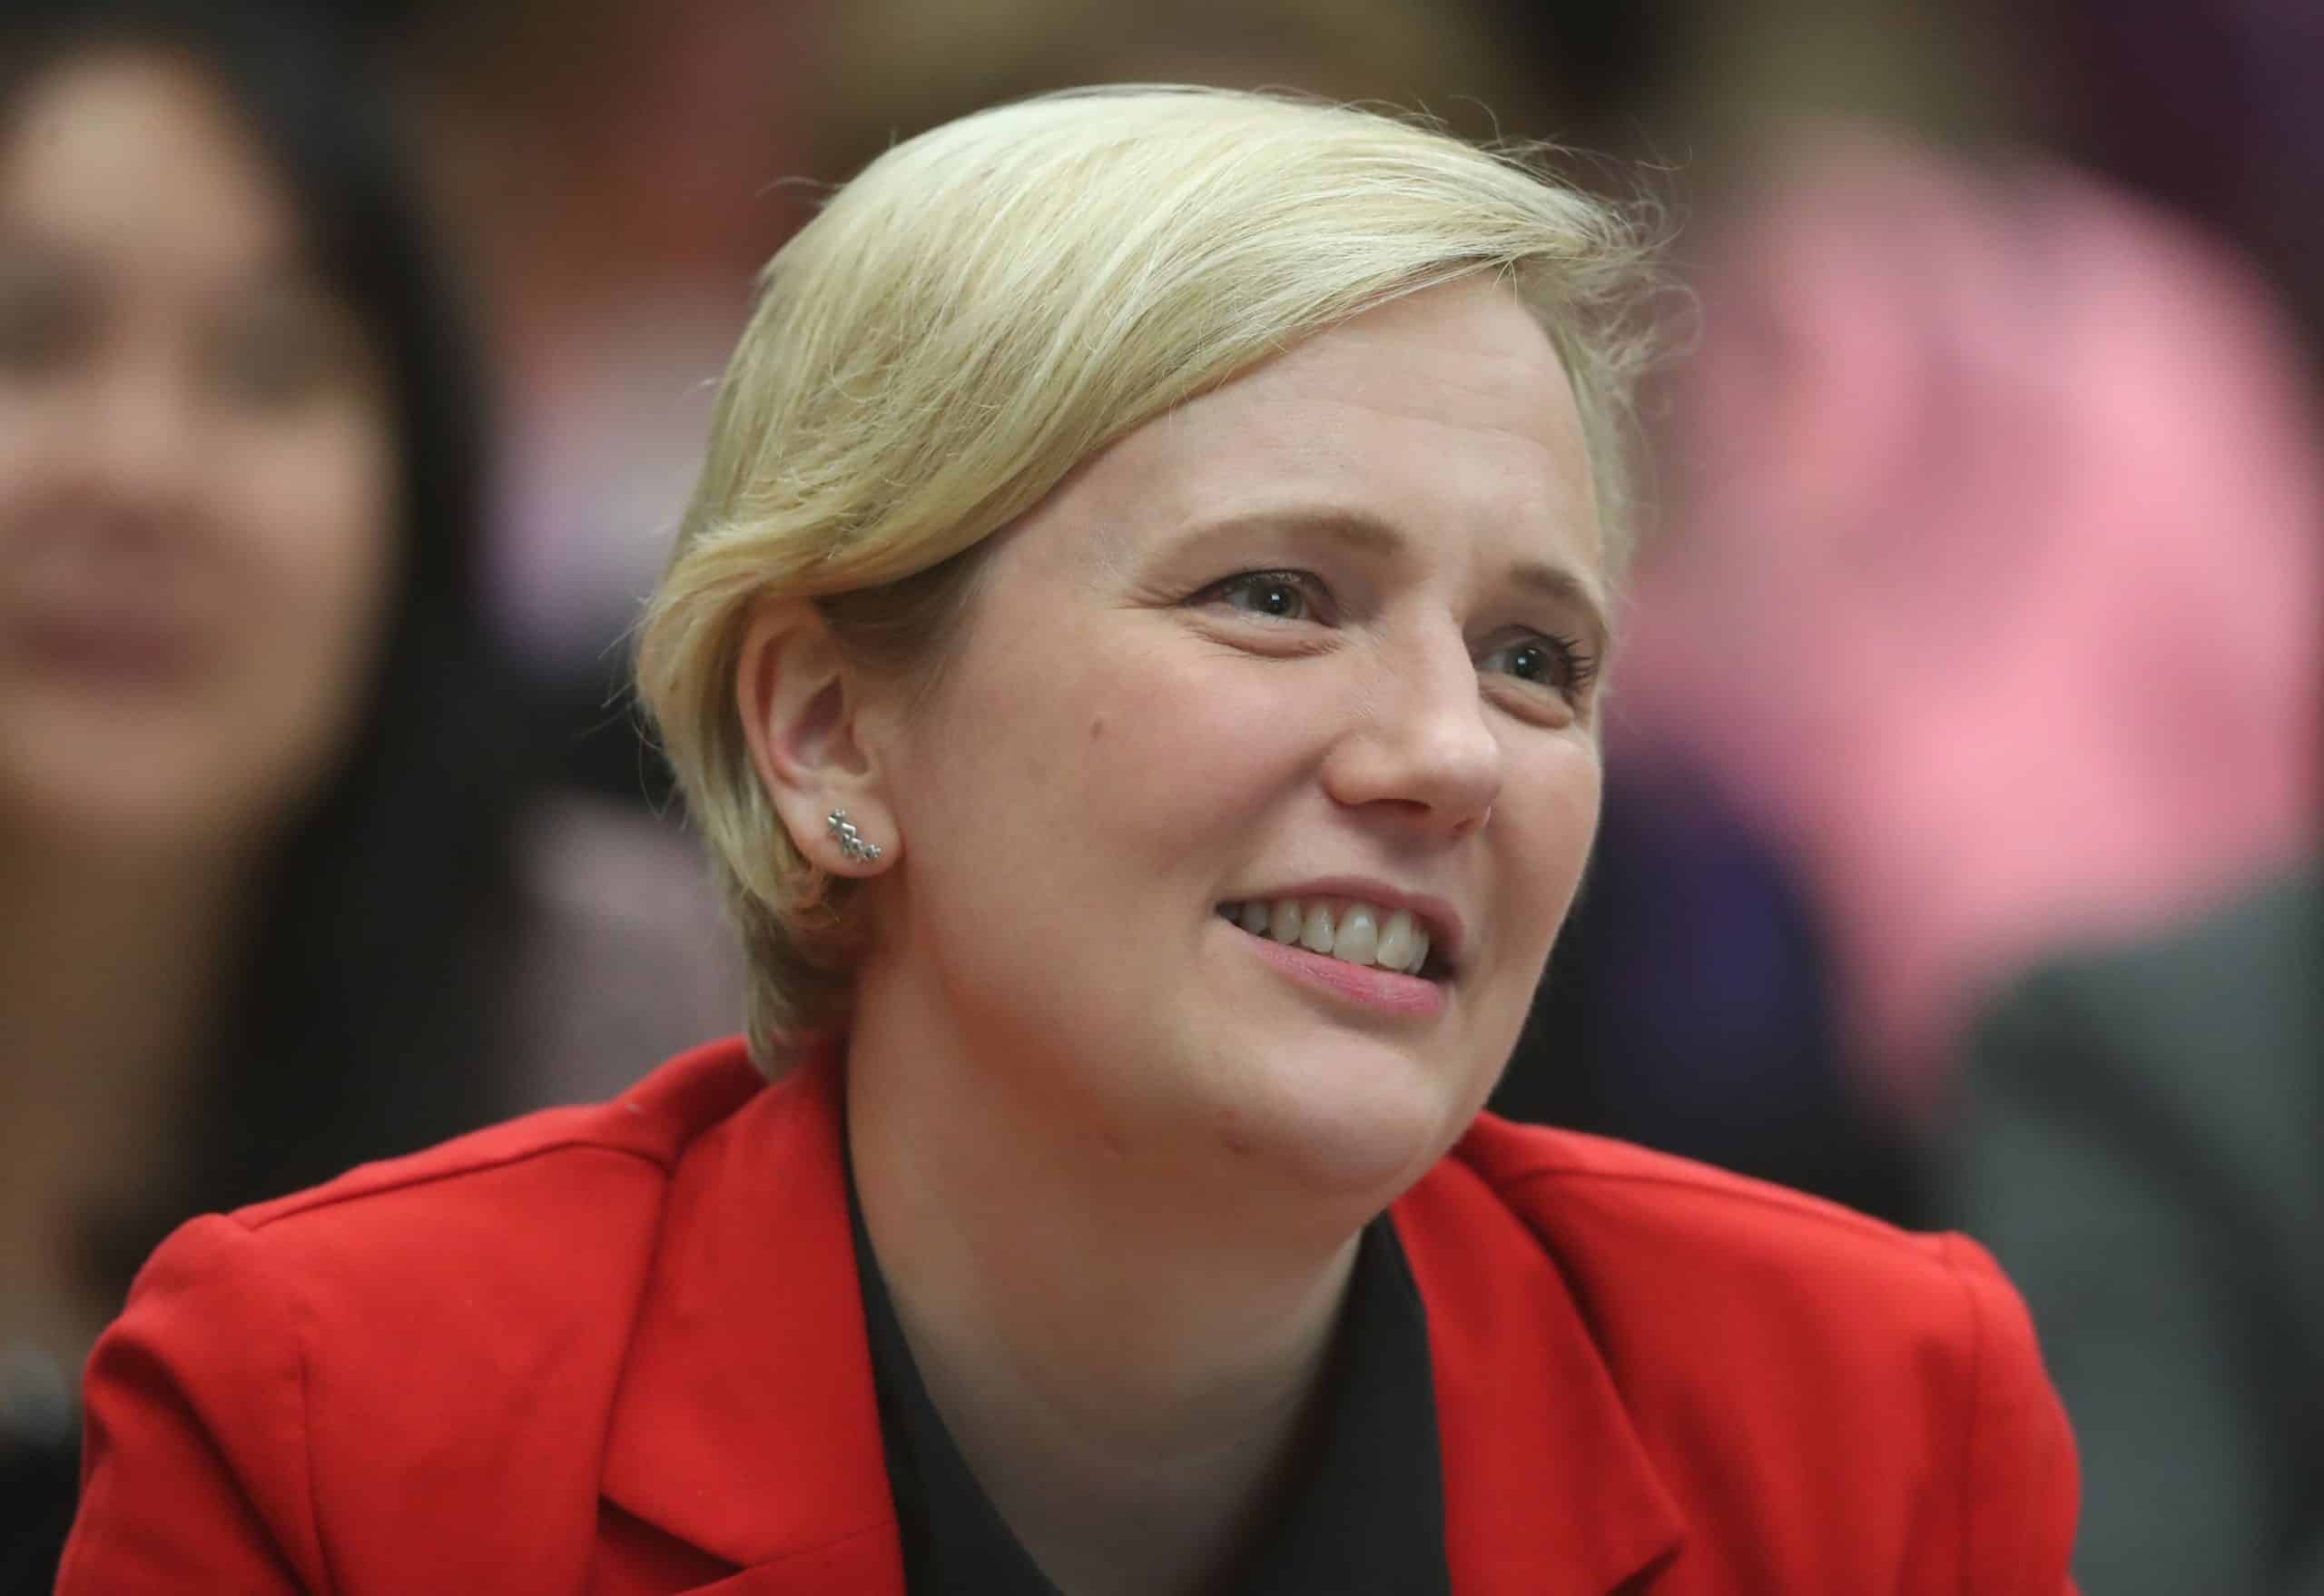 Best takedowns after MP Stella Creasy’s choice of clothes gets criticised